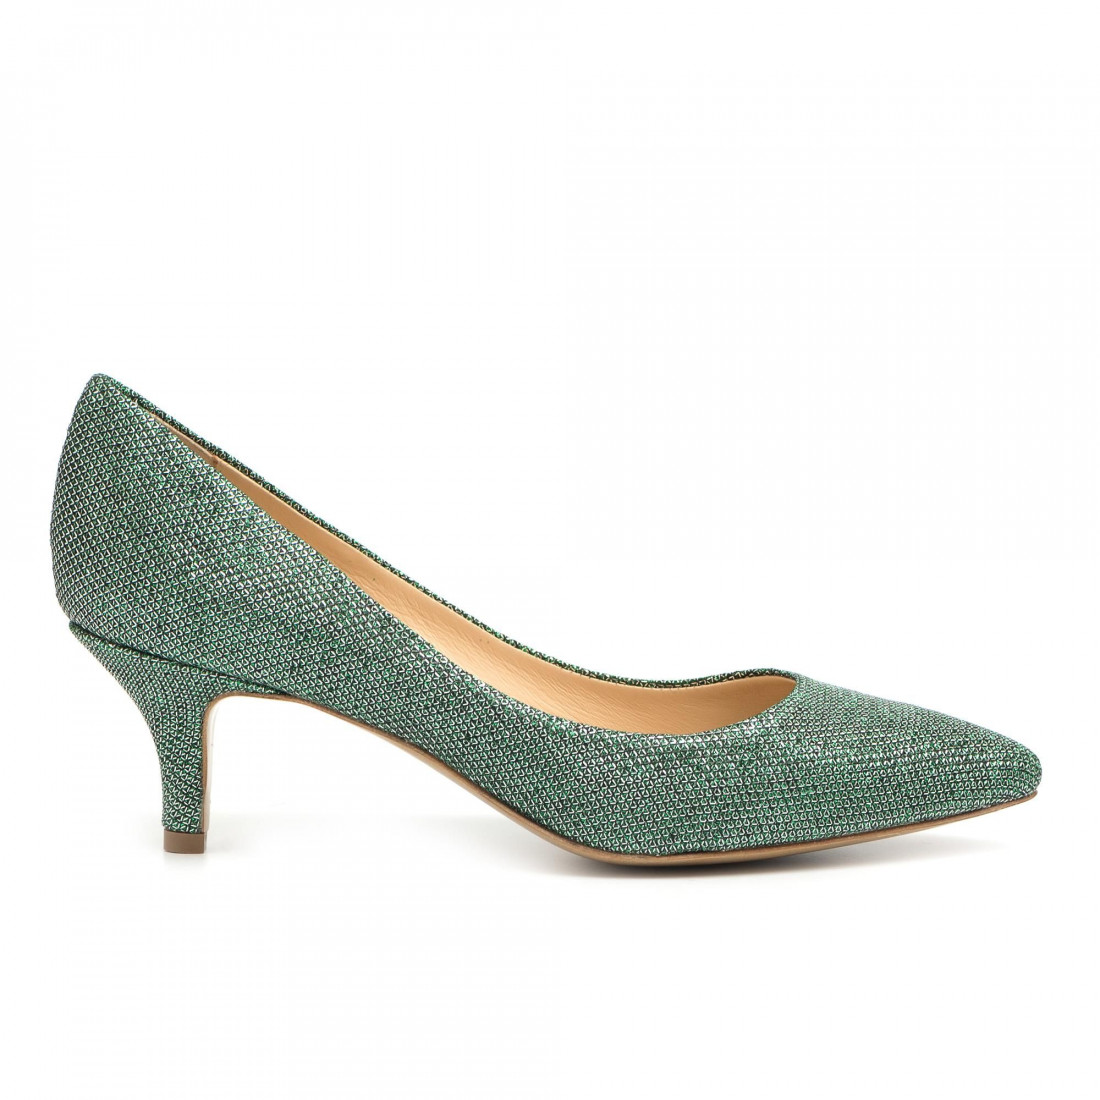 Medium heel pointed toe shoes in green fabric